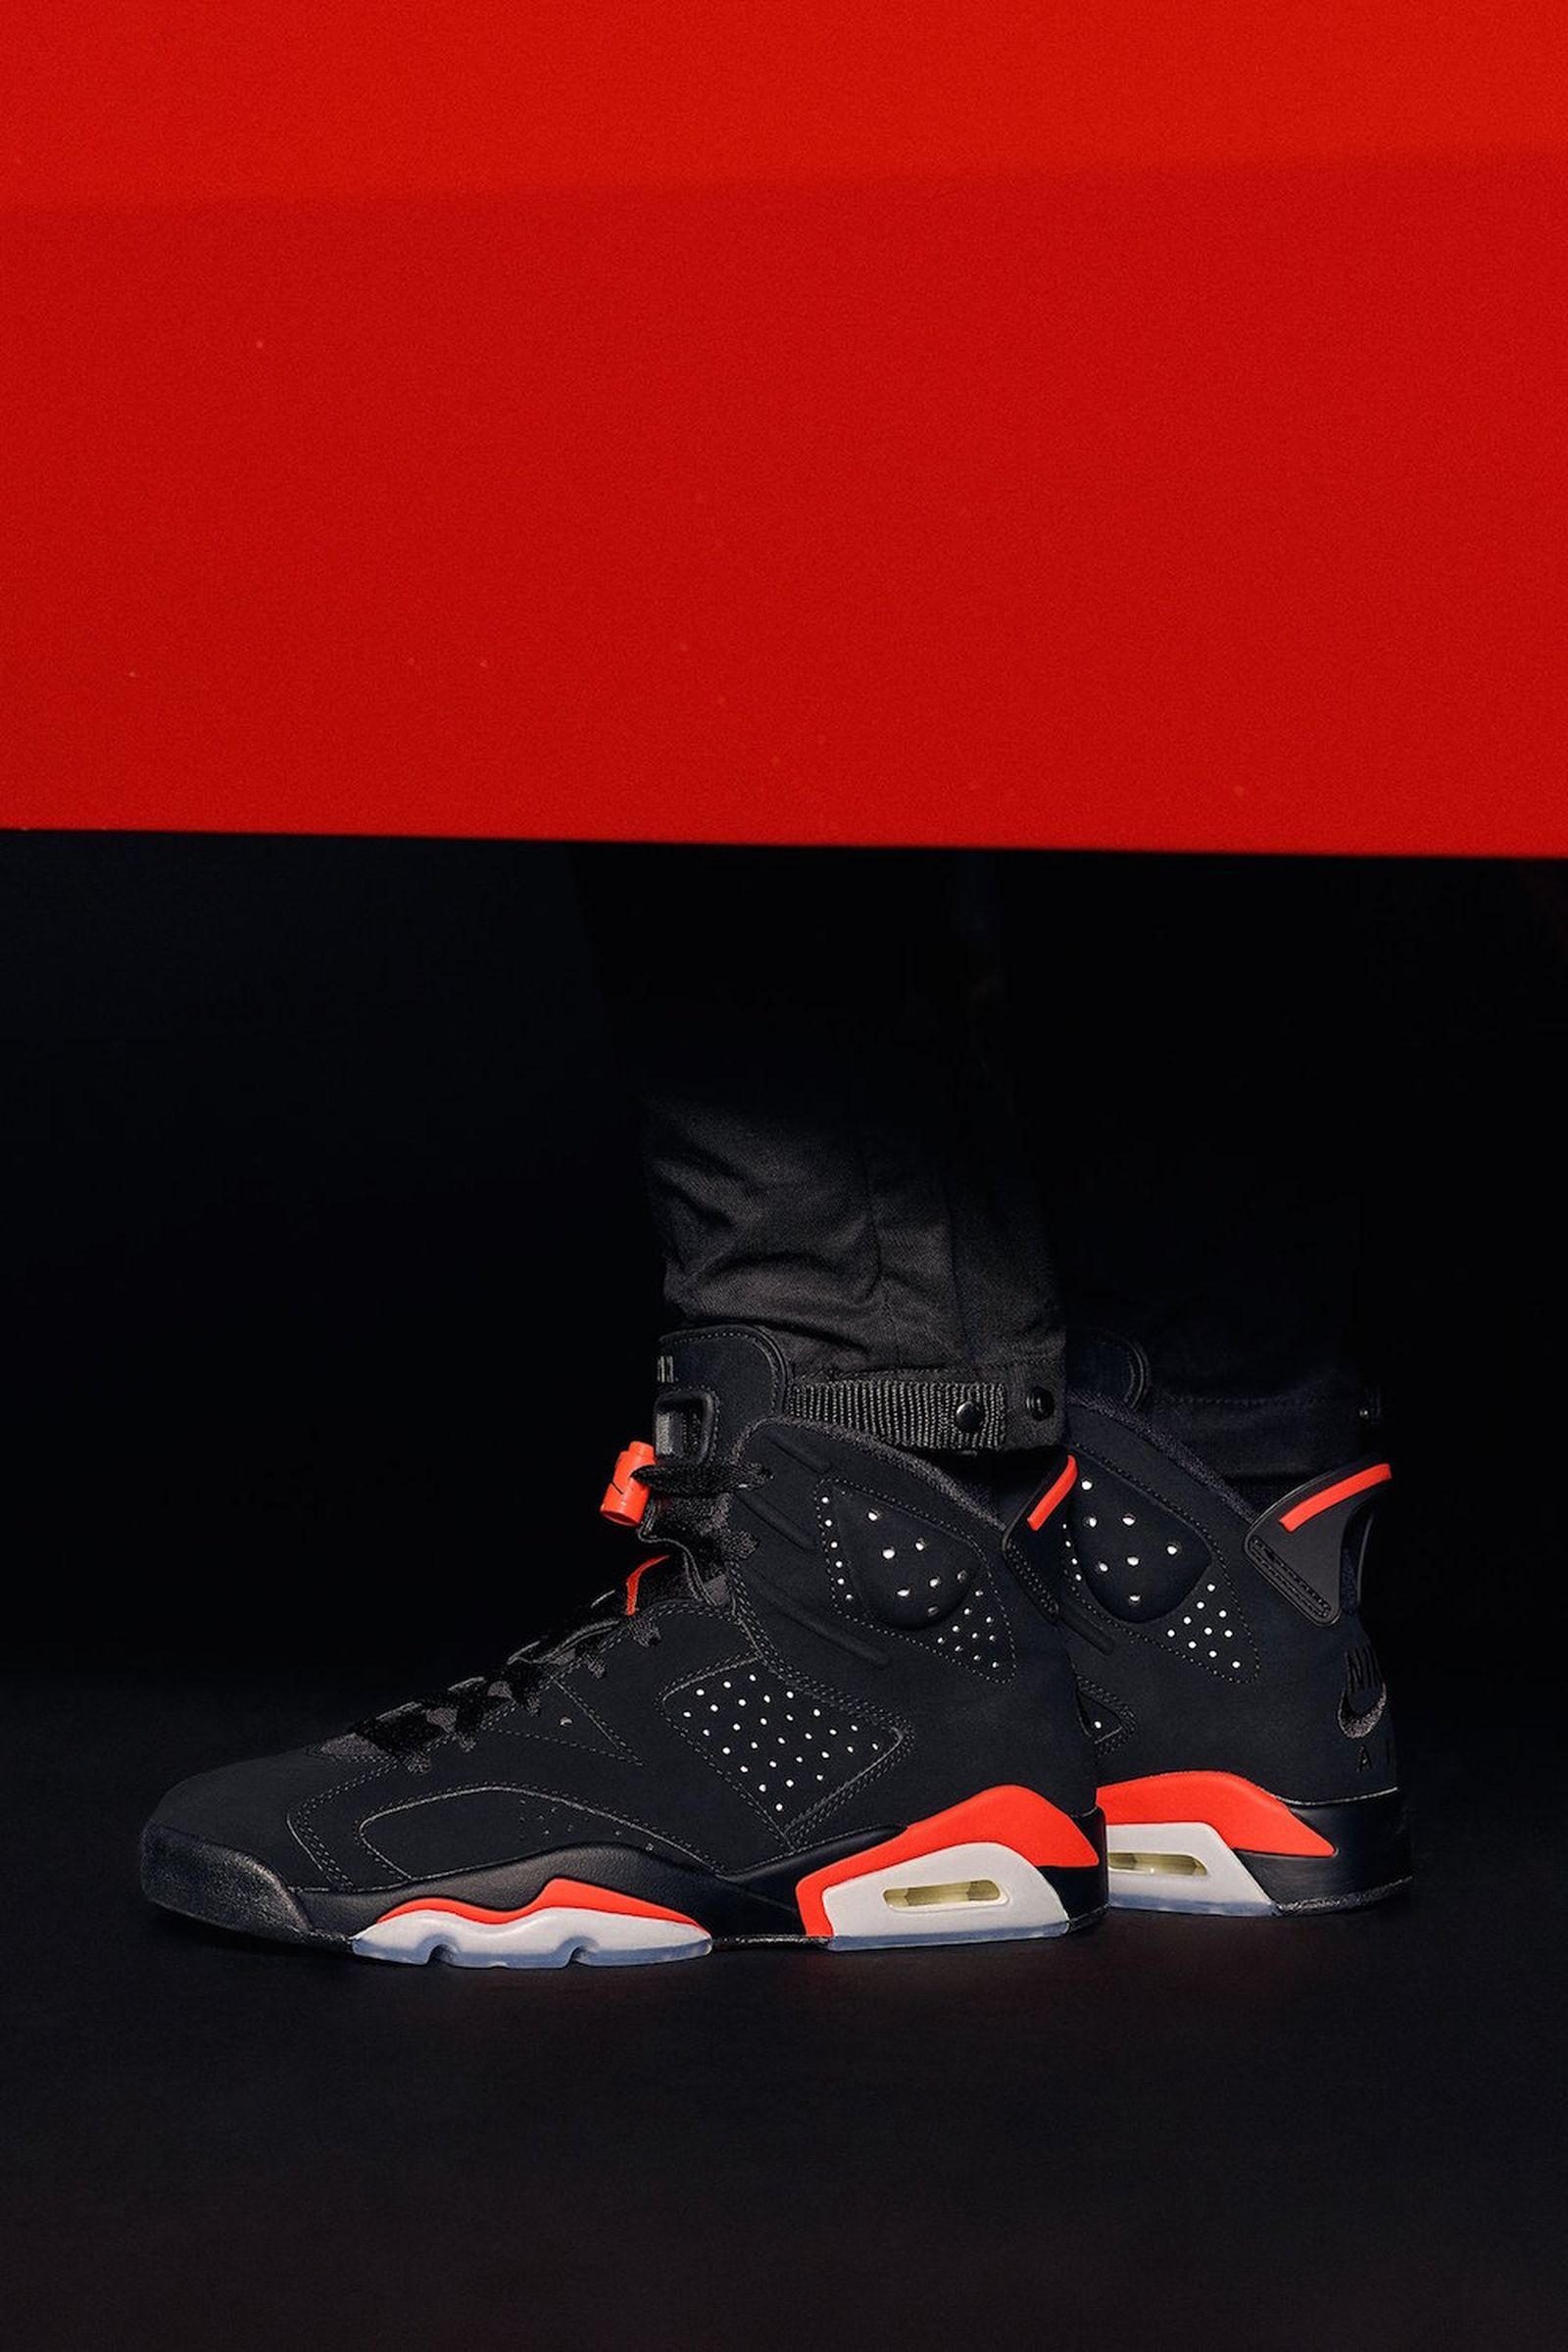 medalist Please watch Serrated Nike Air Jordan 6 “Infrared”: Where to Buy Today